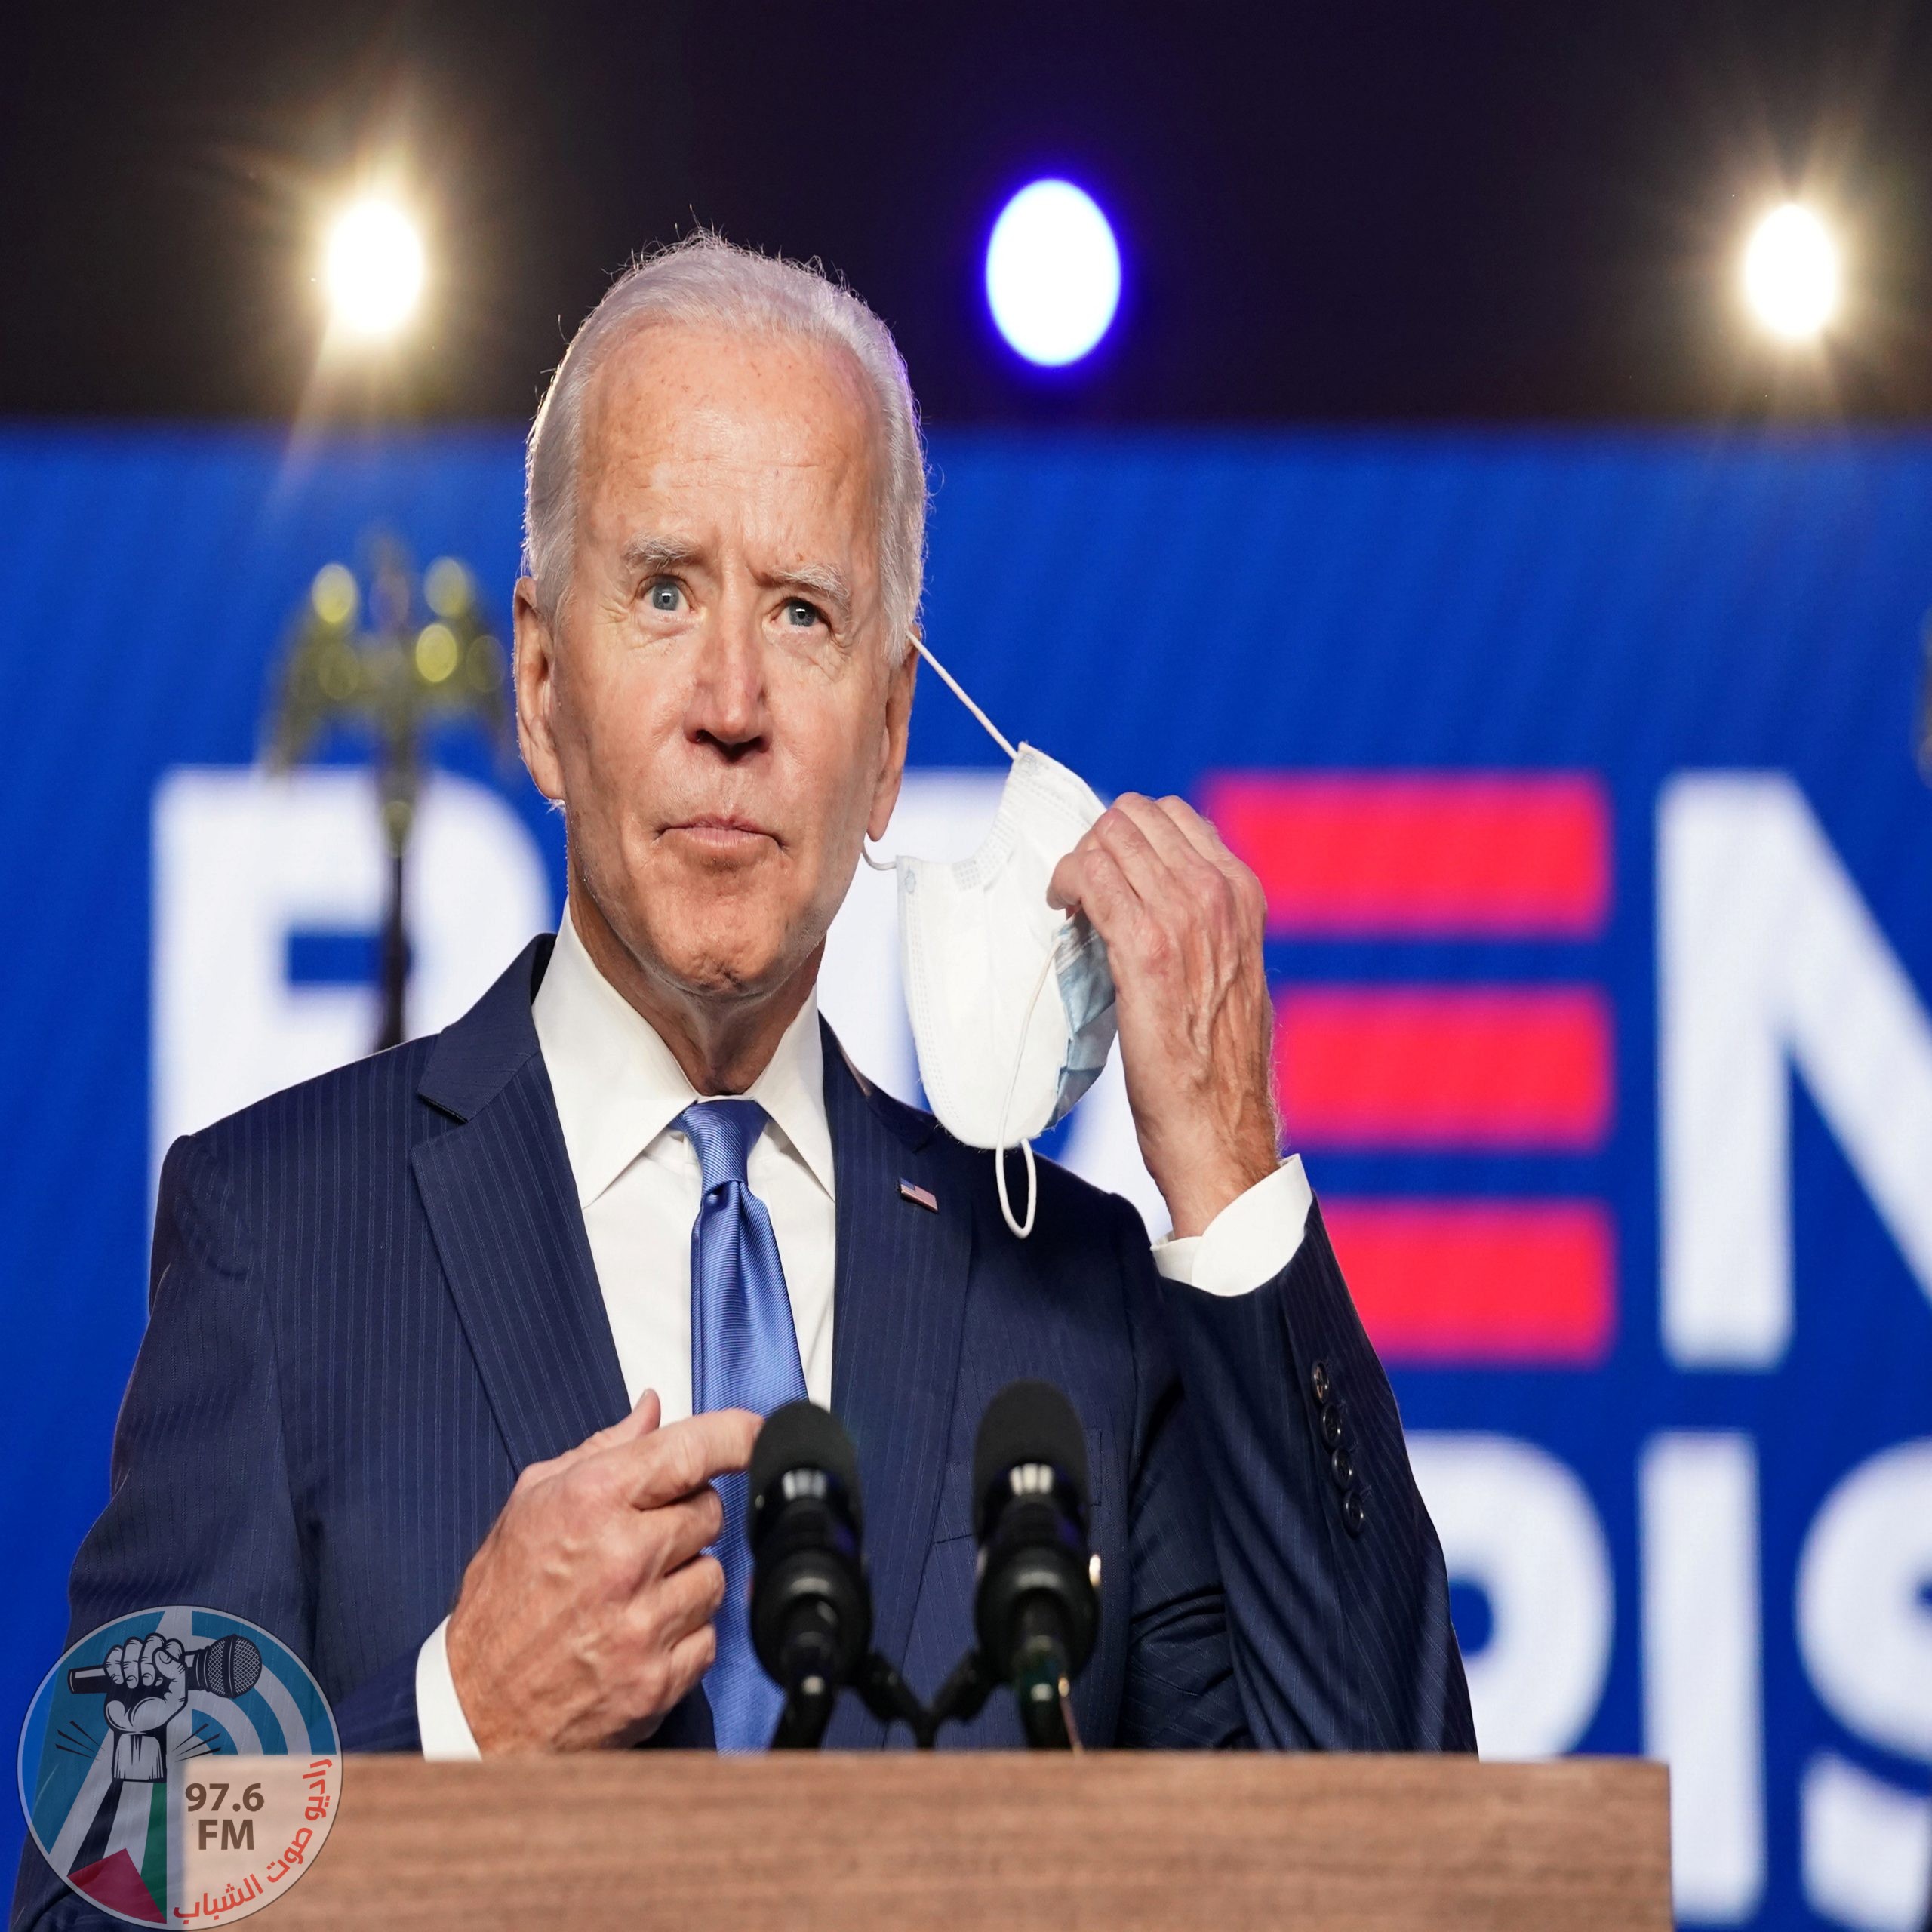 U.S Democratic presidential nominee Joe Biden removes his face mask as he speaks about election results in Wilmington, Delaware, U.S., November 6, 2020. REUTERS/Kevin Lamarque